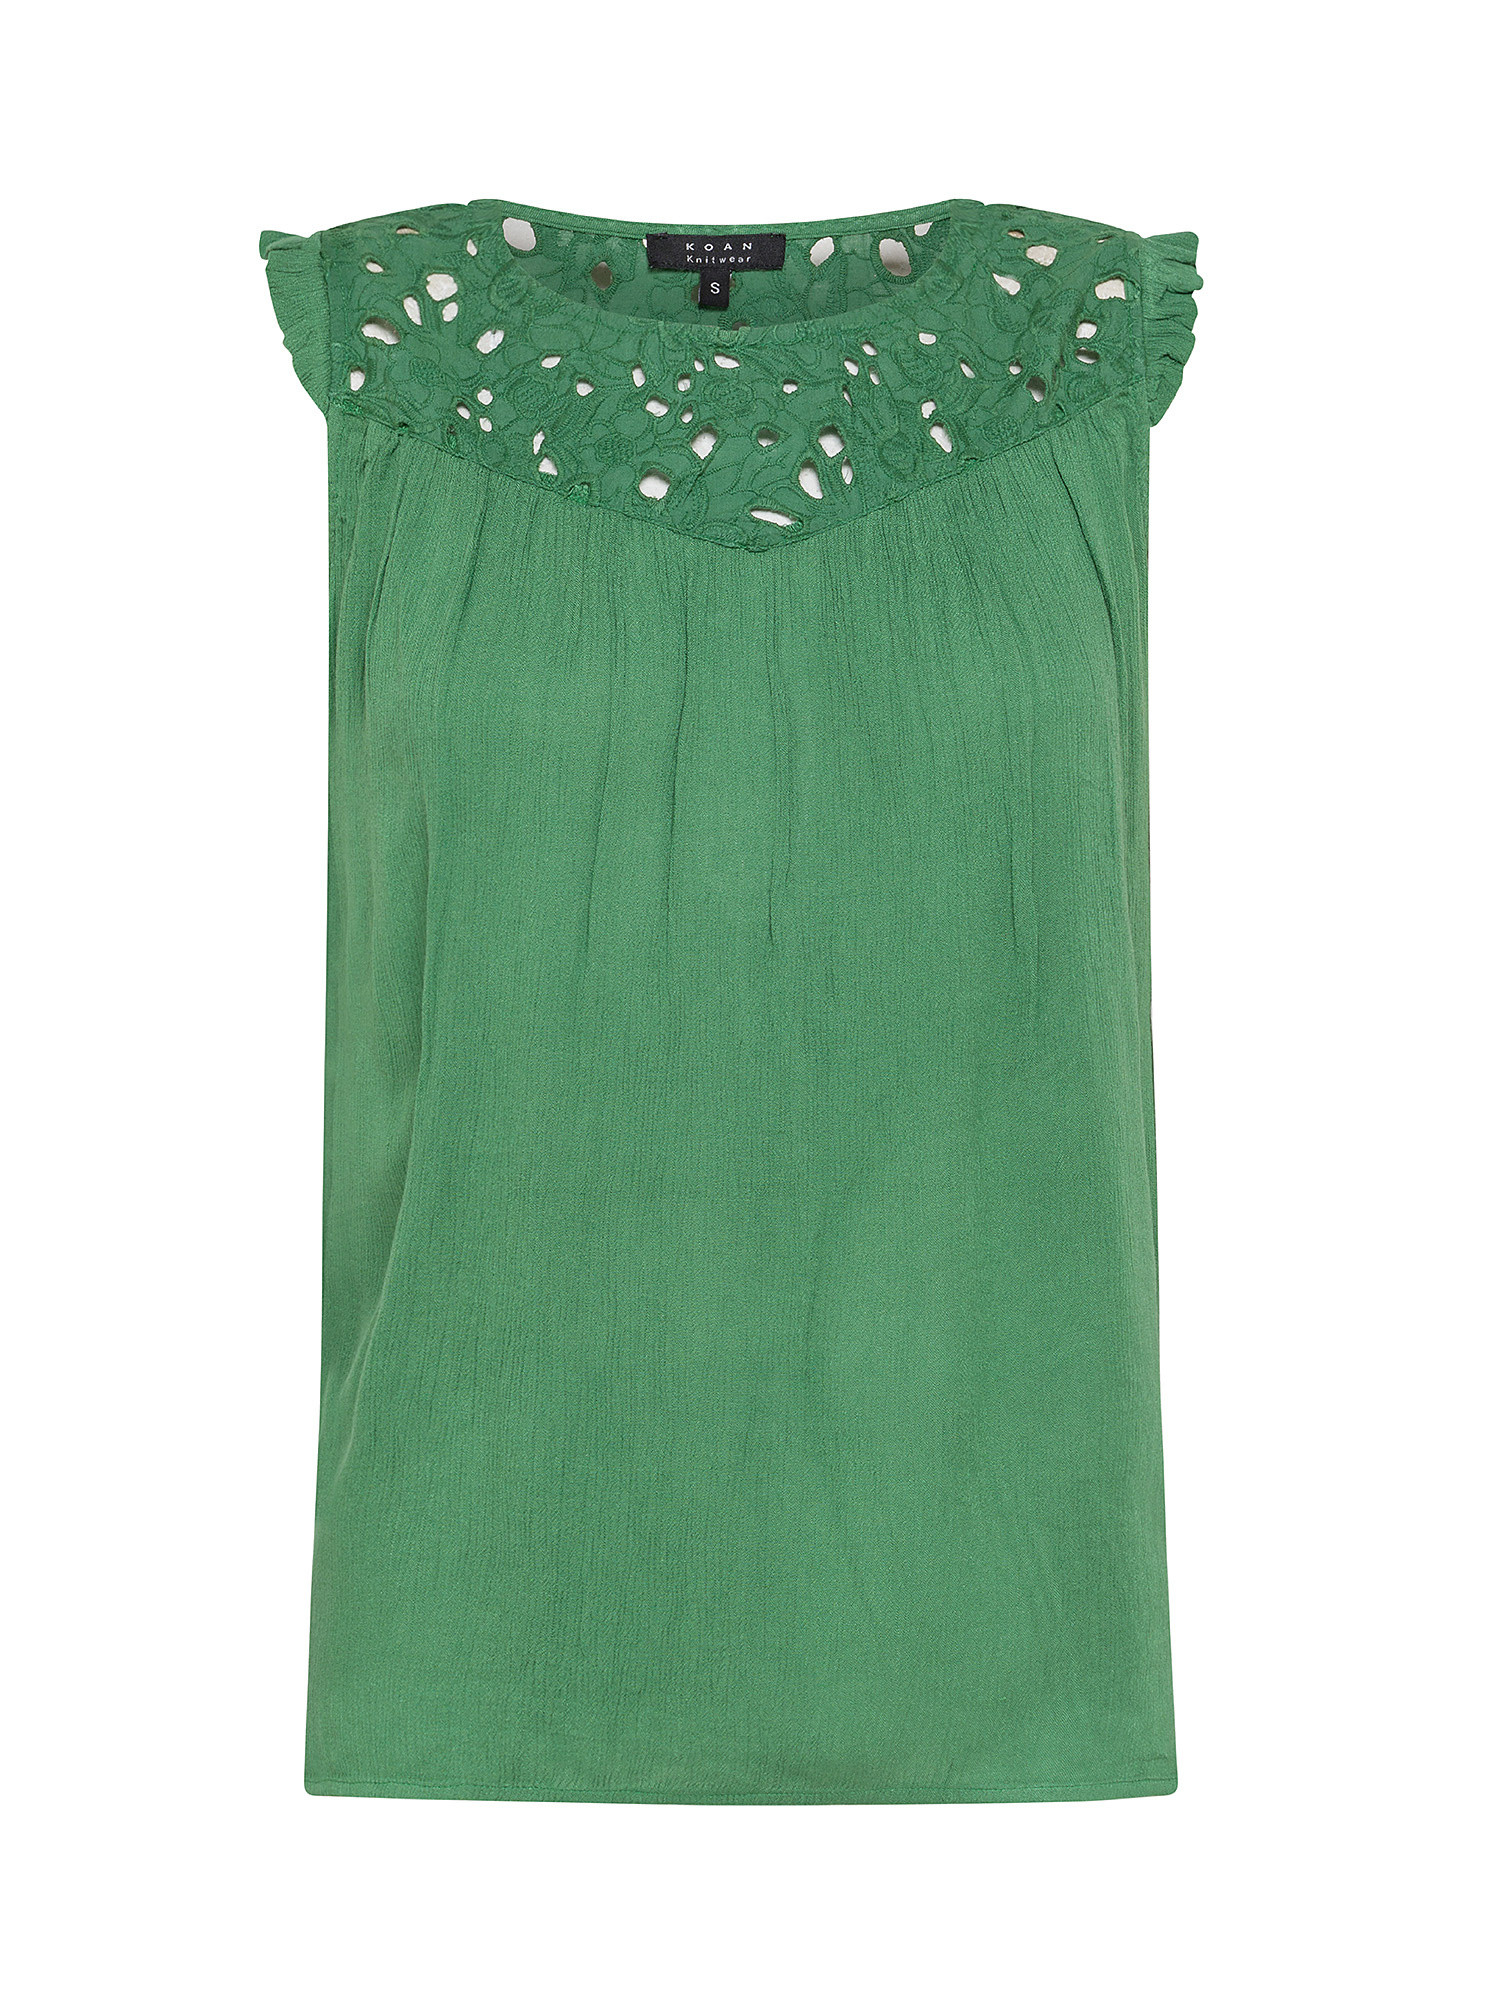 Koan - Camisole with lace, Dark Green, large image number 0